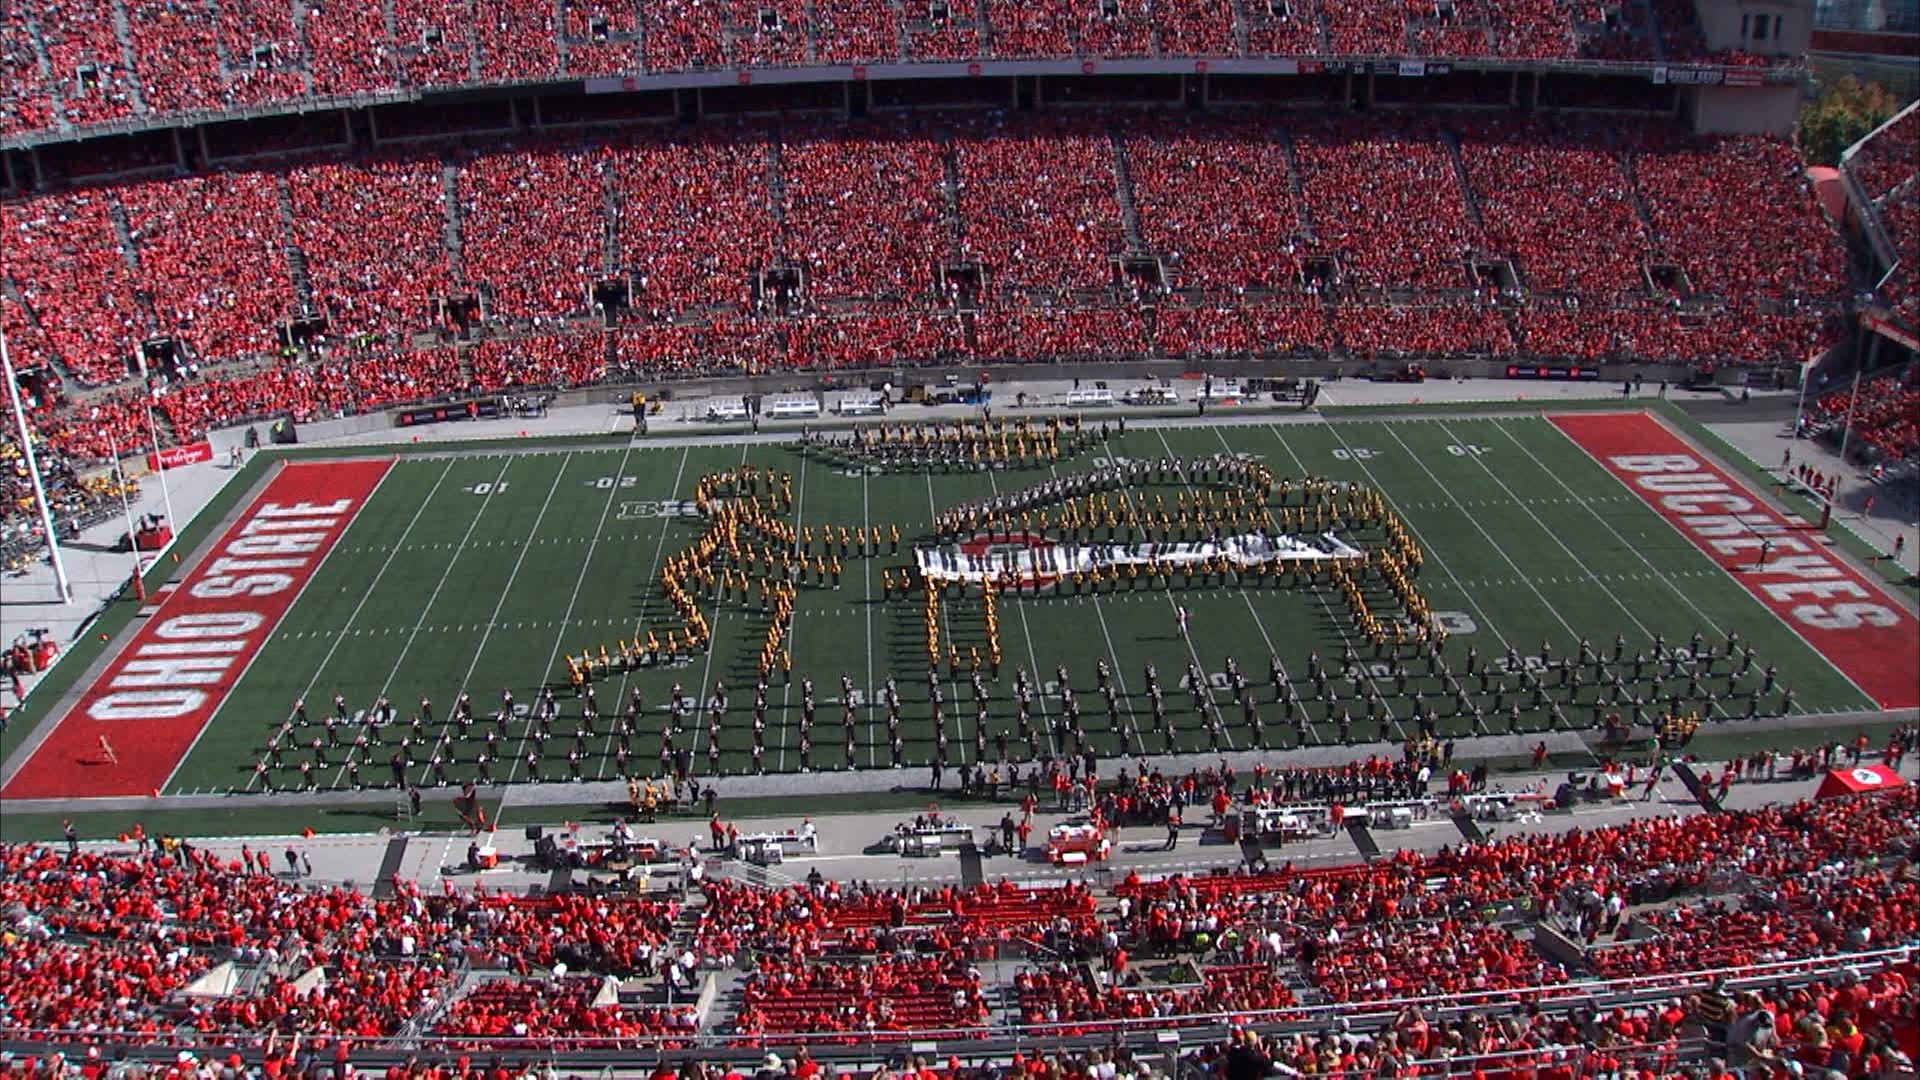 For only the second time in program history, TBDBITL performed with another band to honor legendary artist Elton John.